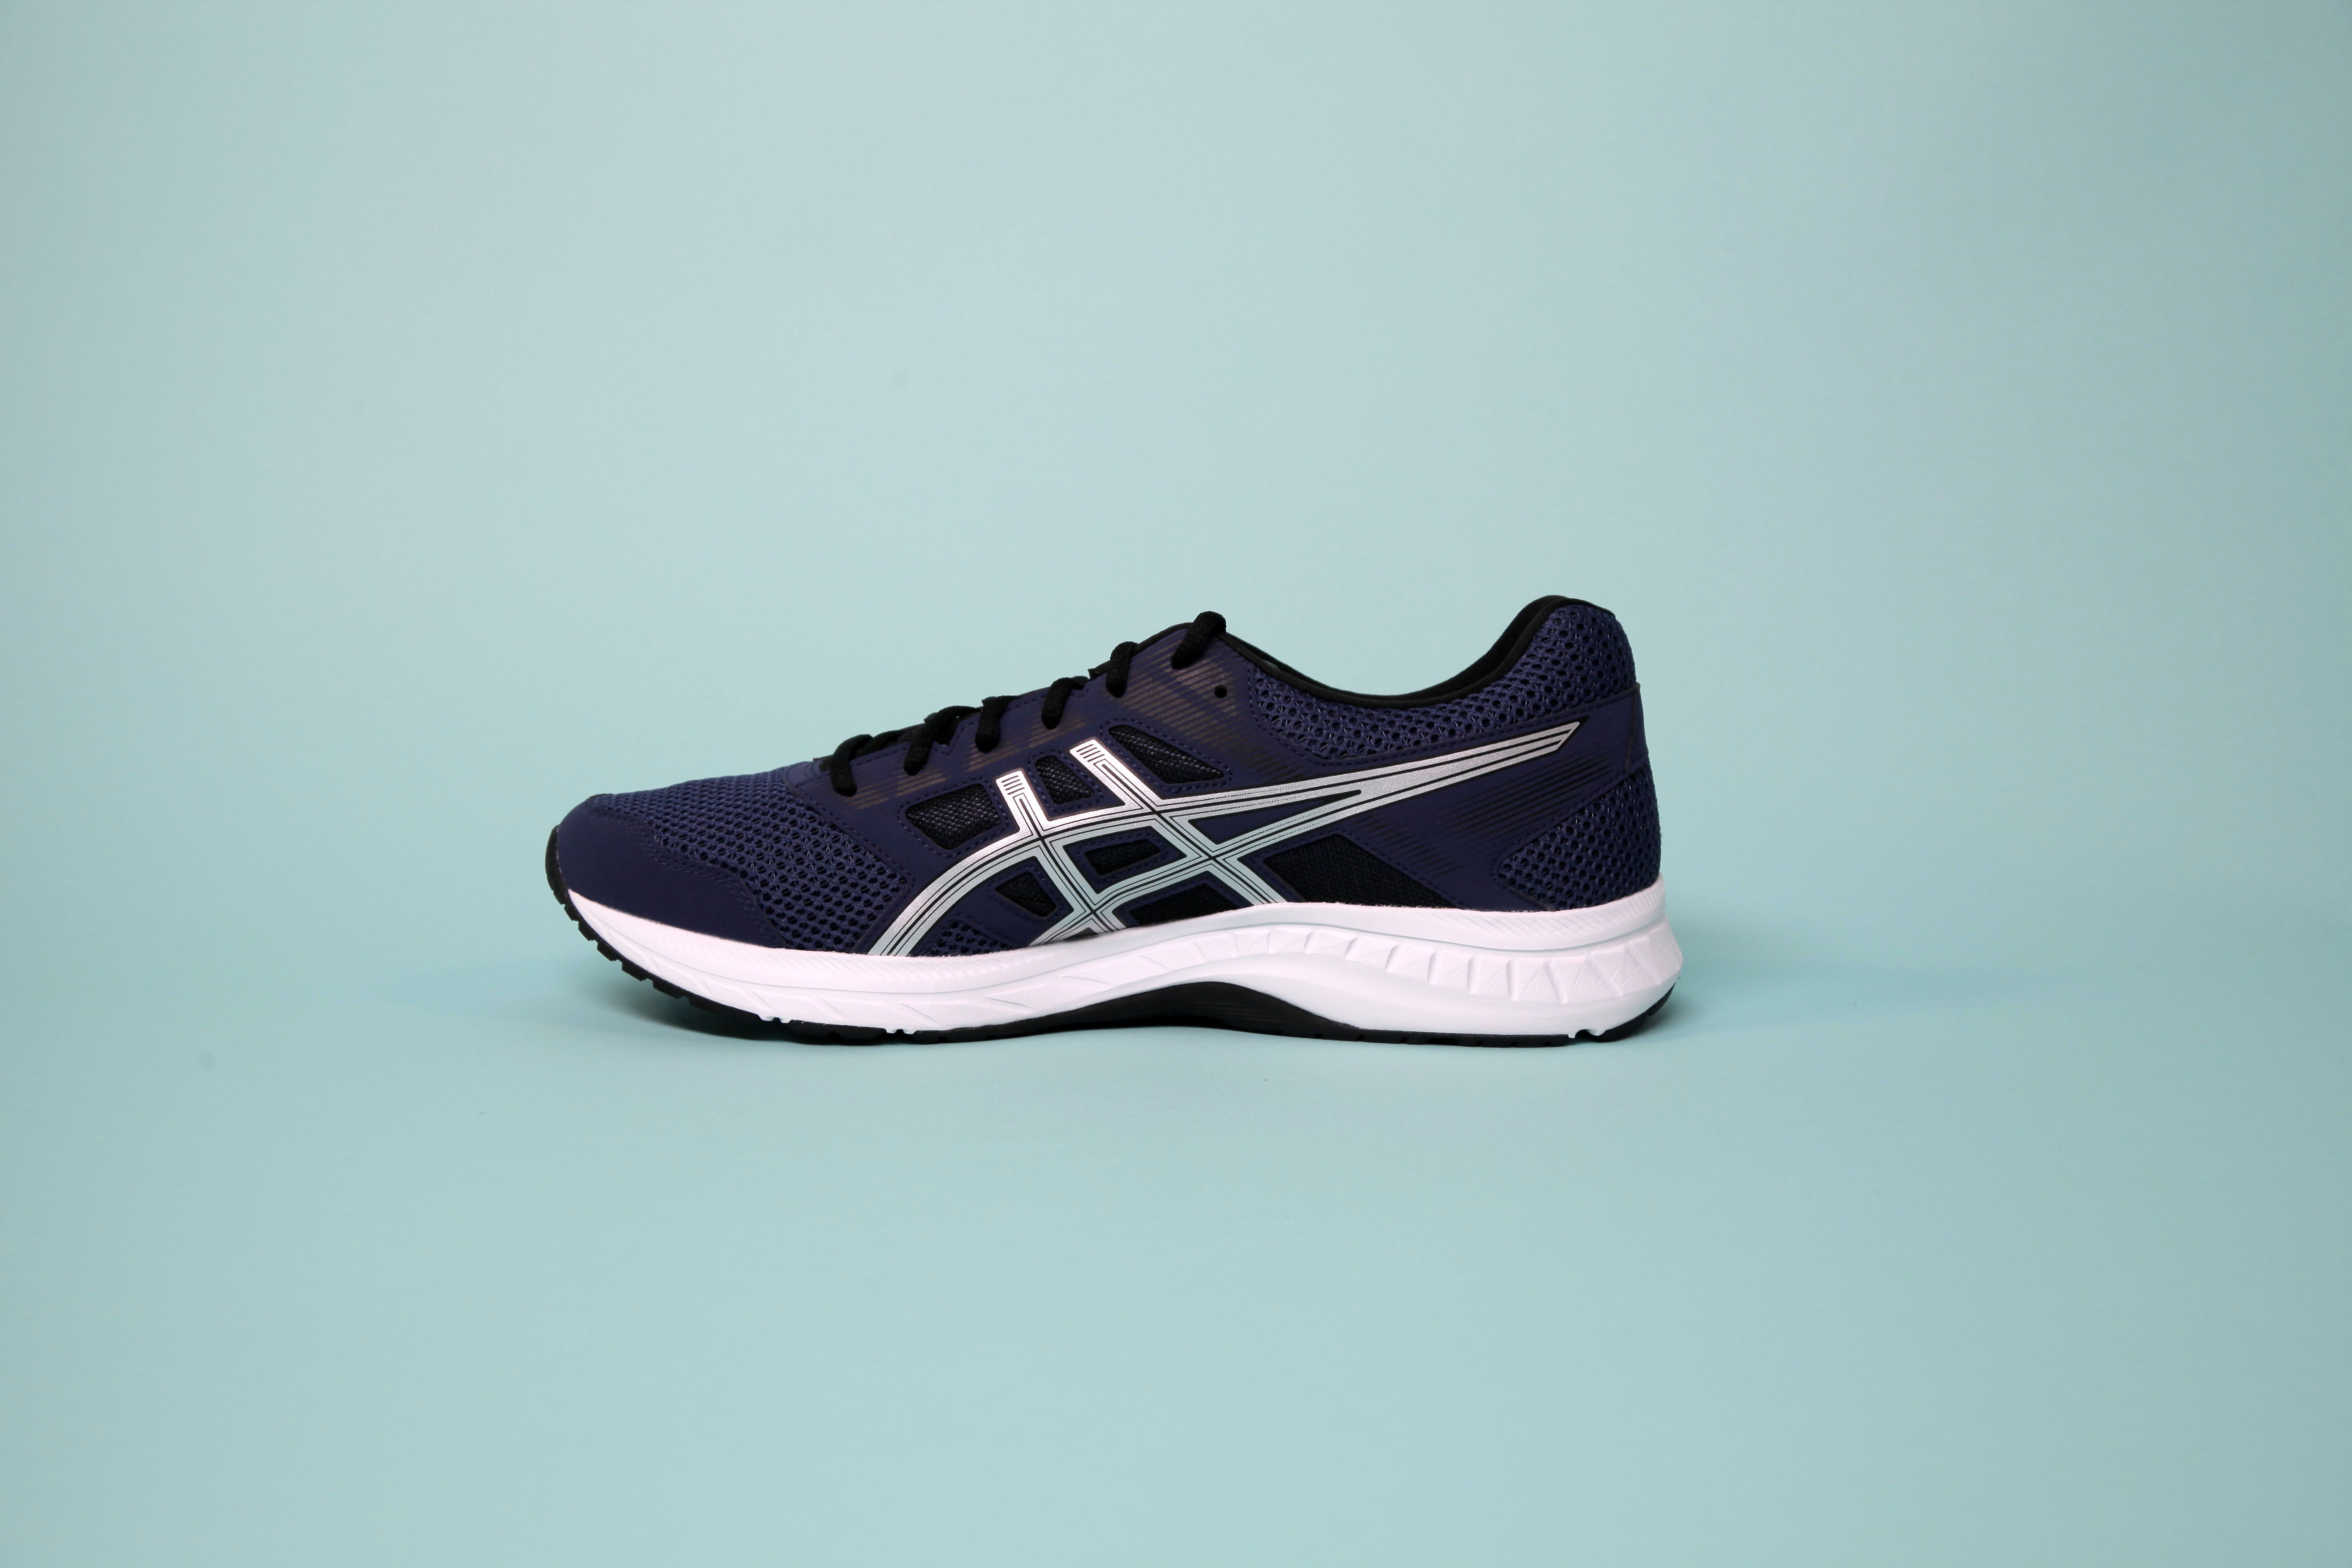 asics contend 2 review